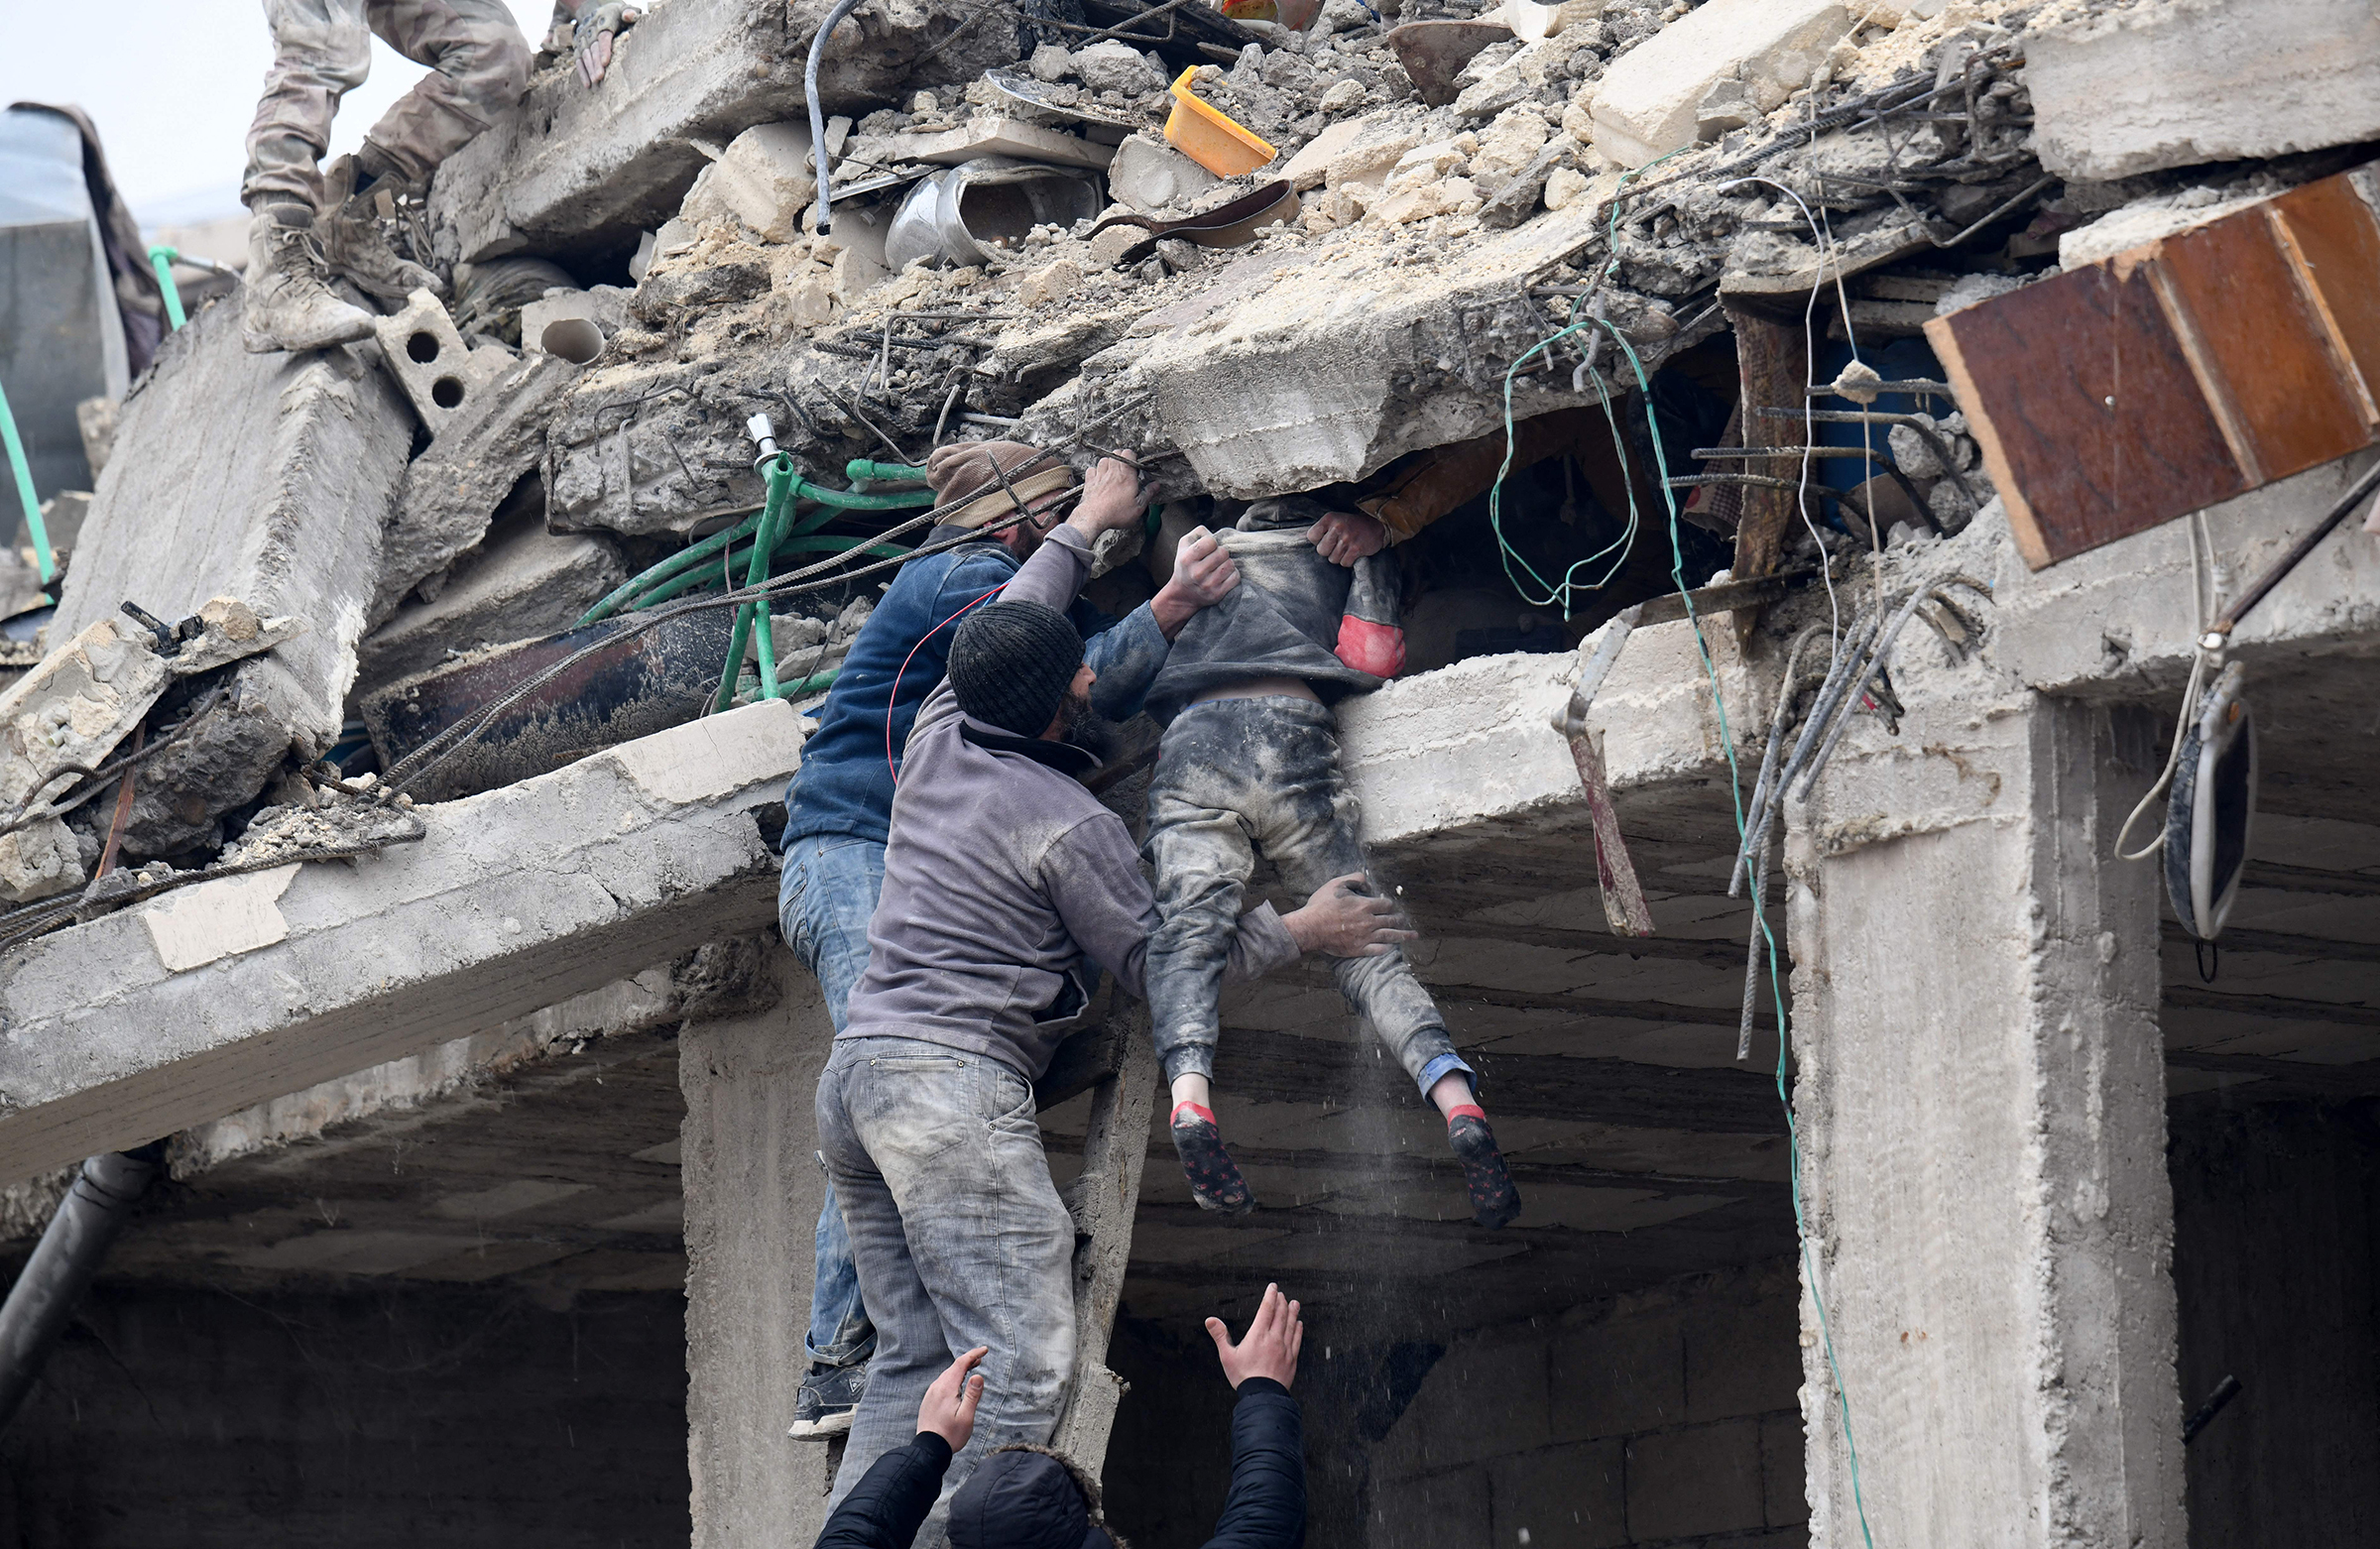 Residents retrieve an injured girl from the rubble of a collapsed building following an earthquake in the town of Jandaris, in the countryside of Syria's northwestern city of Afrin. (Rami Al Sayed—AFP/Getty Images)